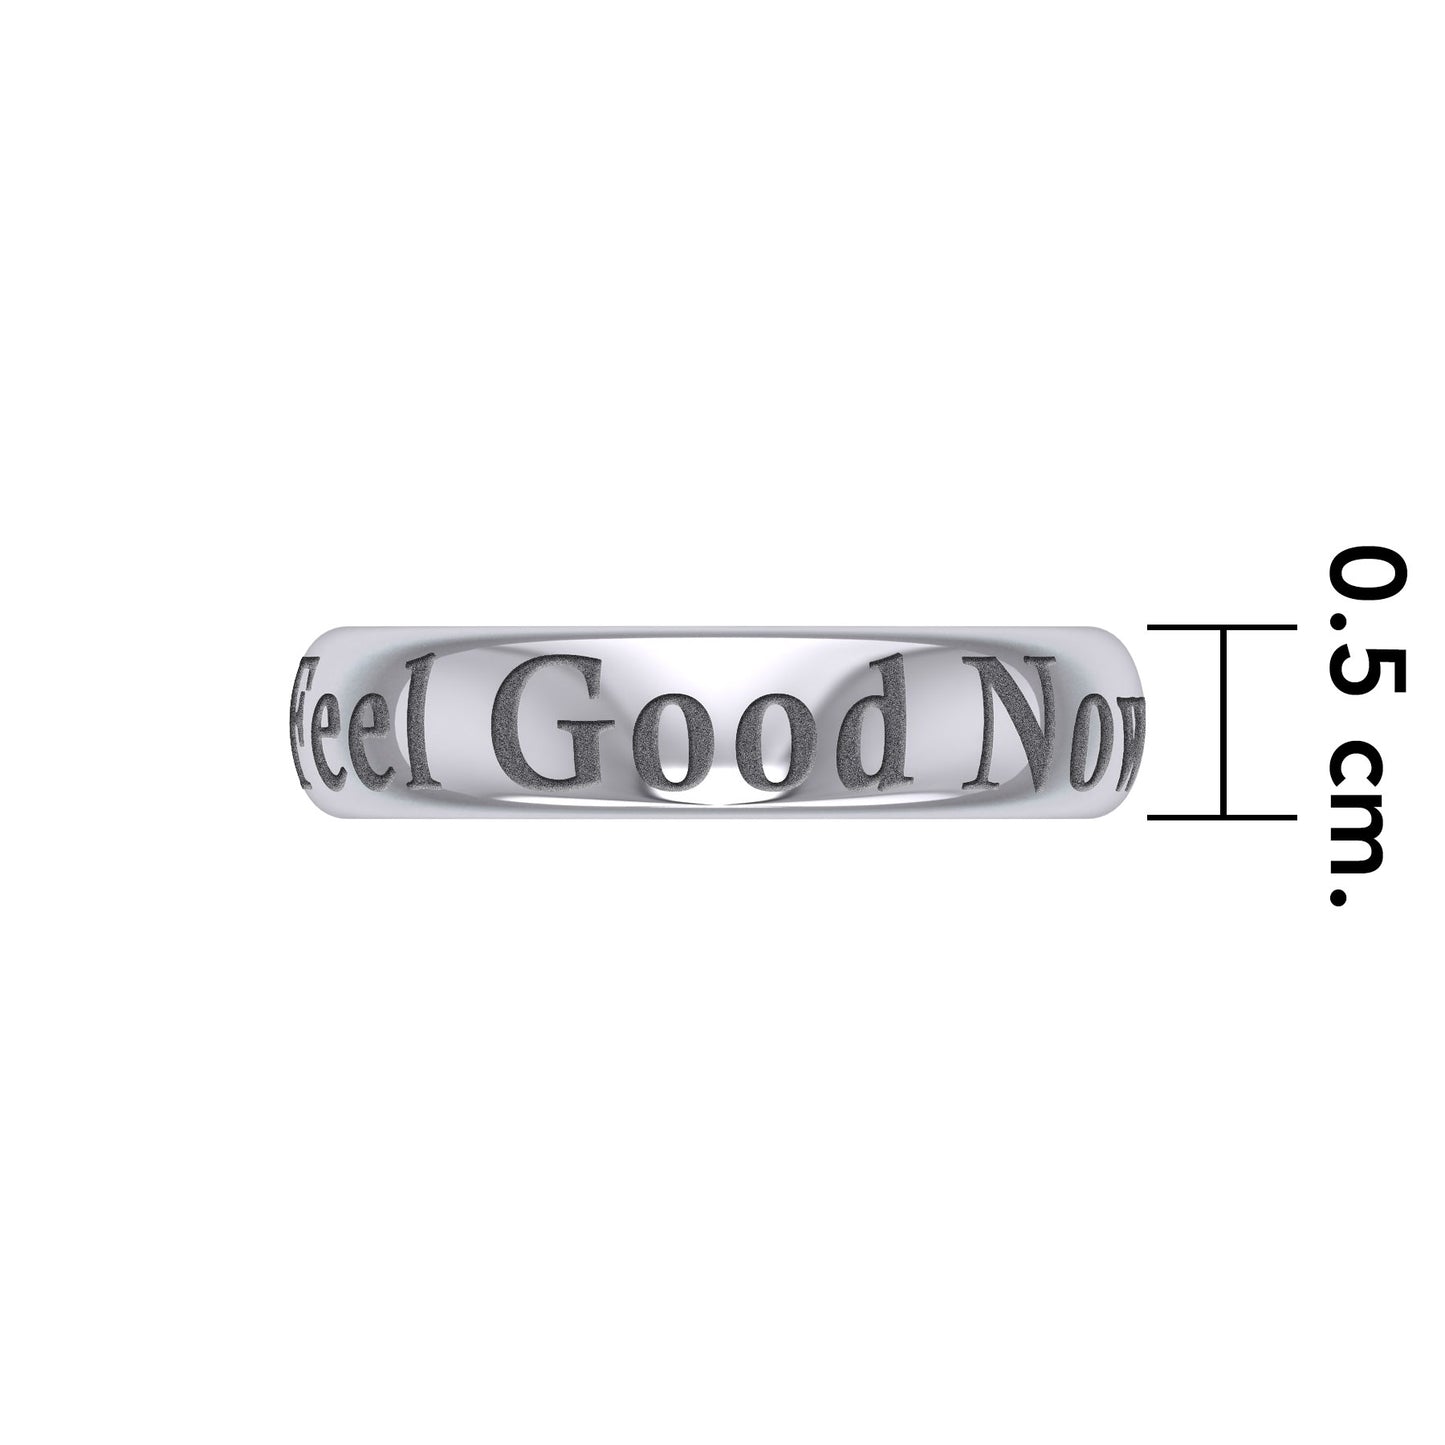 Feel Good Now Silver Band Ring TRI1096